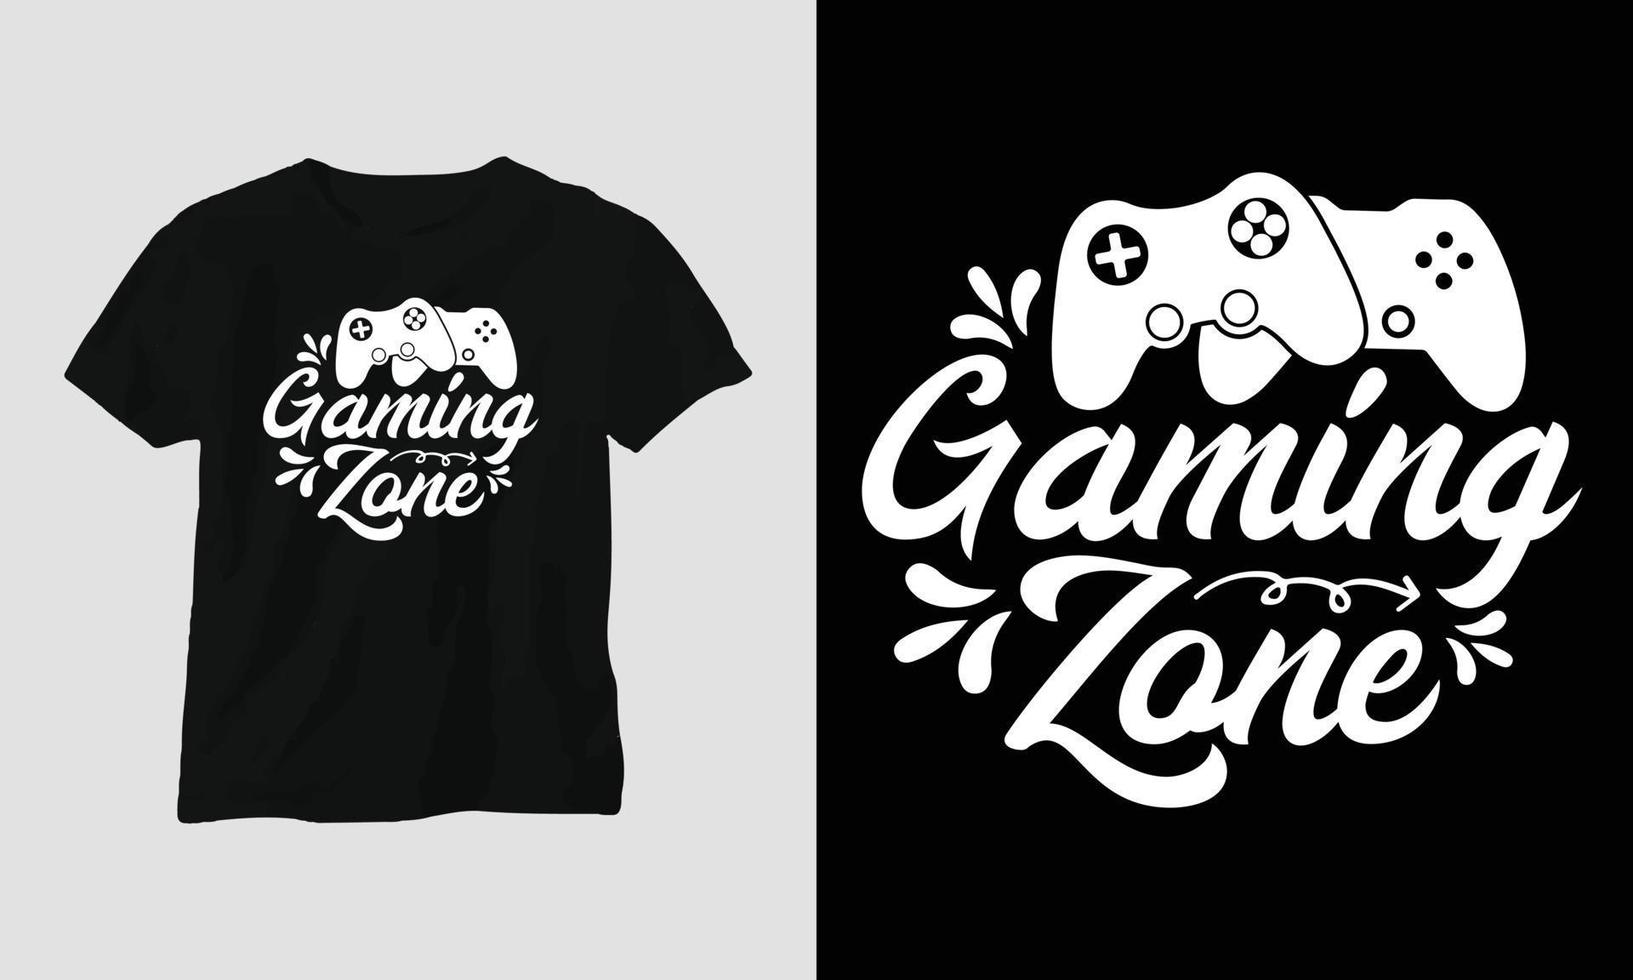 gaming zone - Gamer quotes T-shirt and apparel Typography Design vector